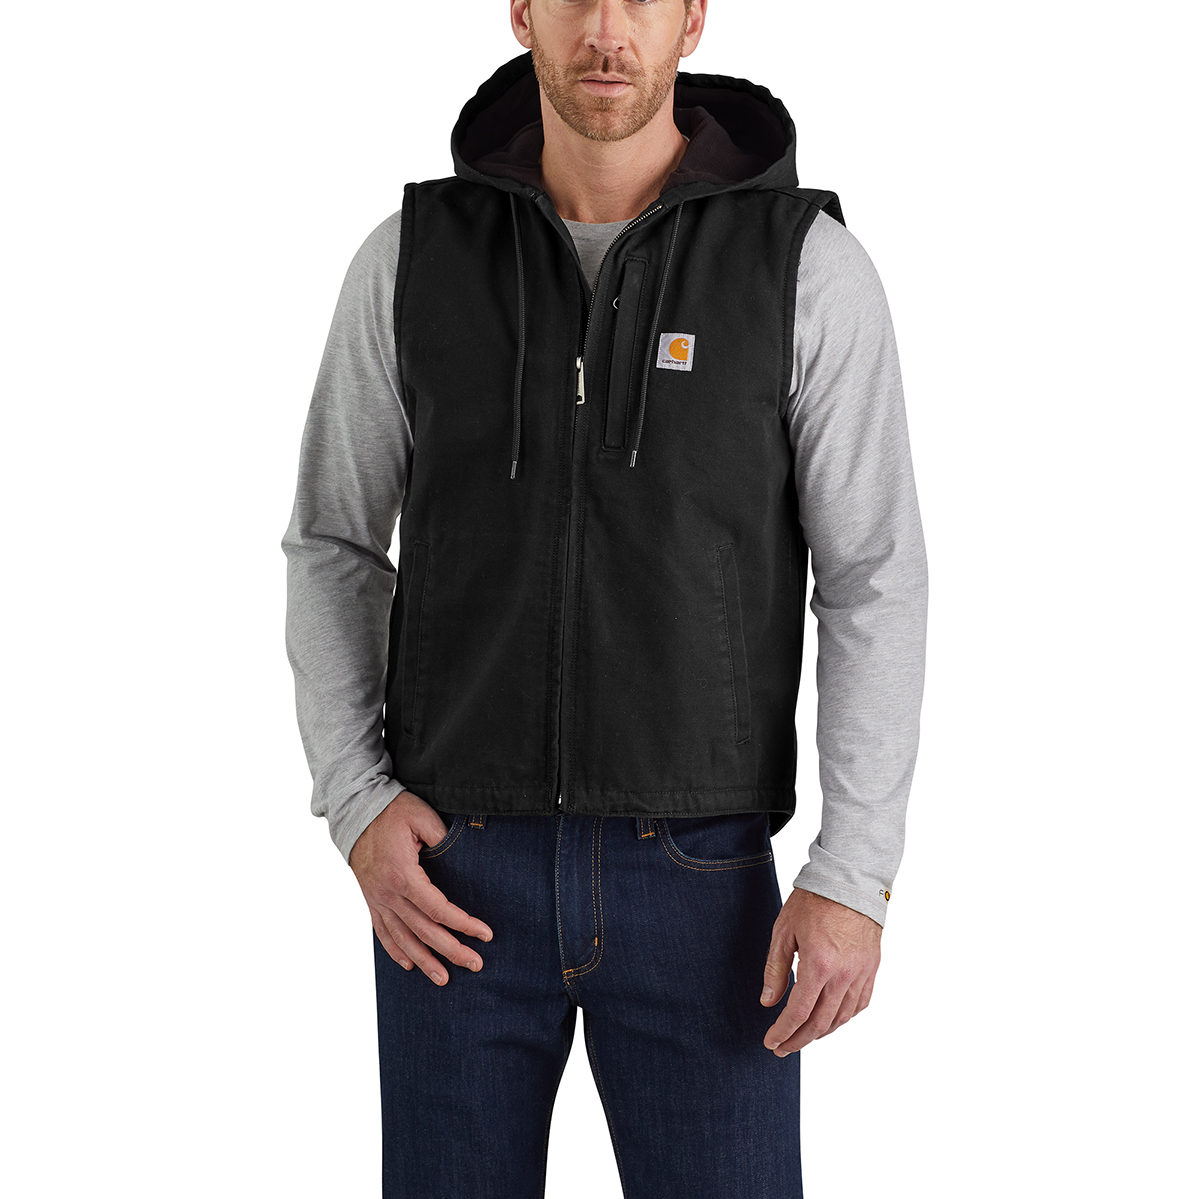 X-Large Details about   Carhartt mens Knoxville Vest Regular and Big & Tall Sizes Gravel 